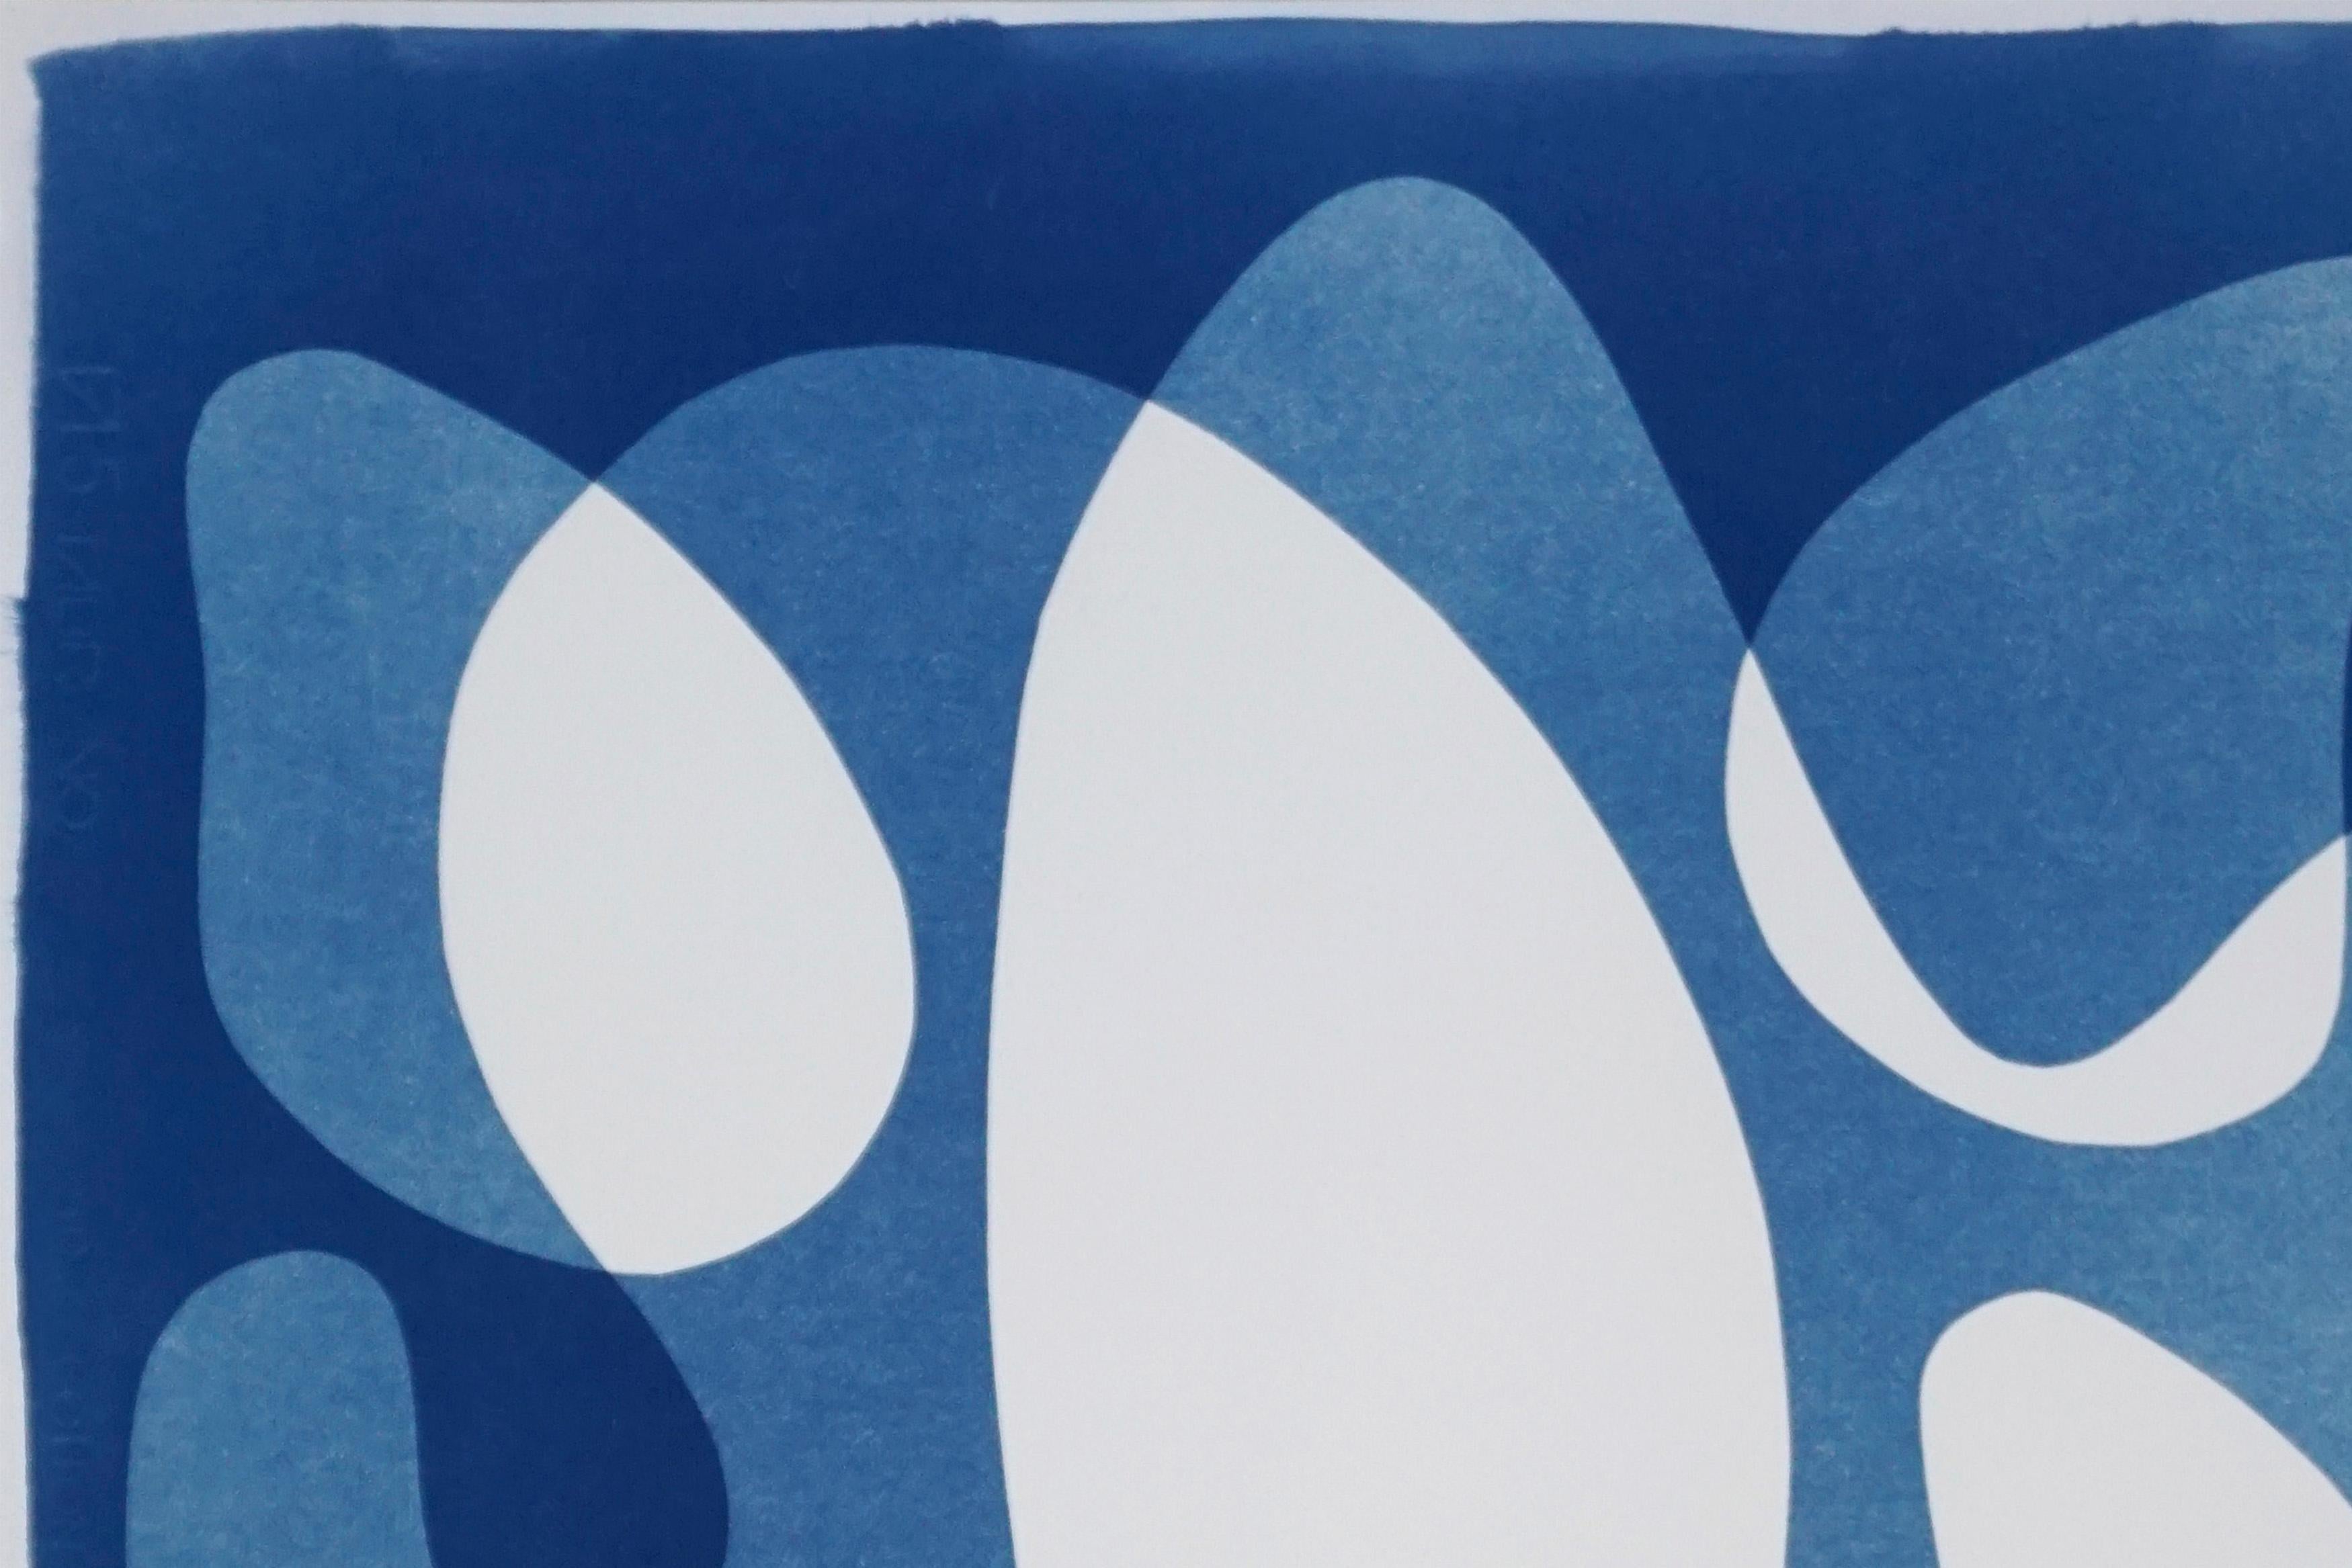 This is an exclusive handprinted unique cyanotype that takes its inspiration from mid-century modern style shapes.

It's made by layering paper cutouts and different exposures using uv-light. 

Details:
+ Title: Flowing Curved Shapes
+ Year: 2020
+